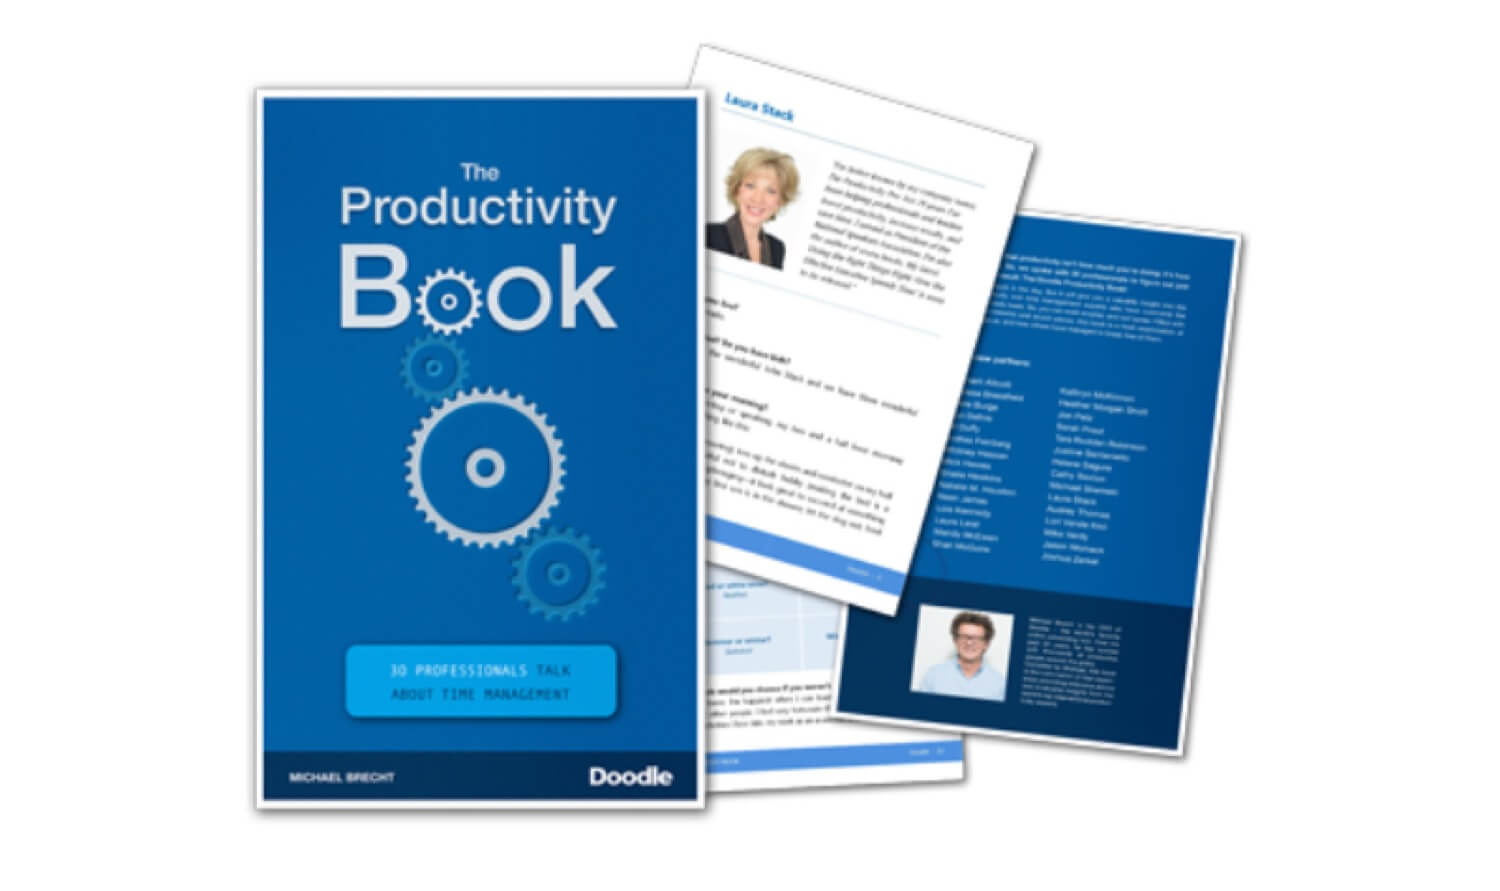 The Productivity Book, featuring 30 productivity experts including me ;-)